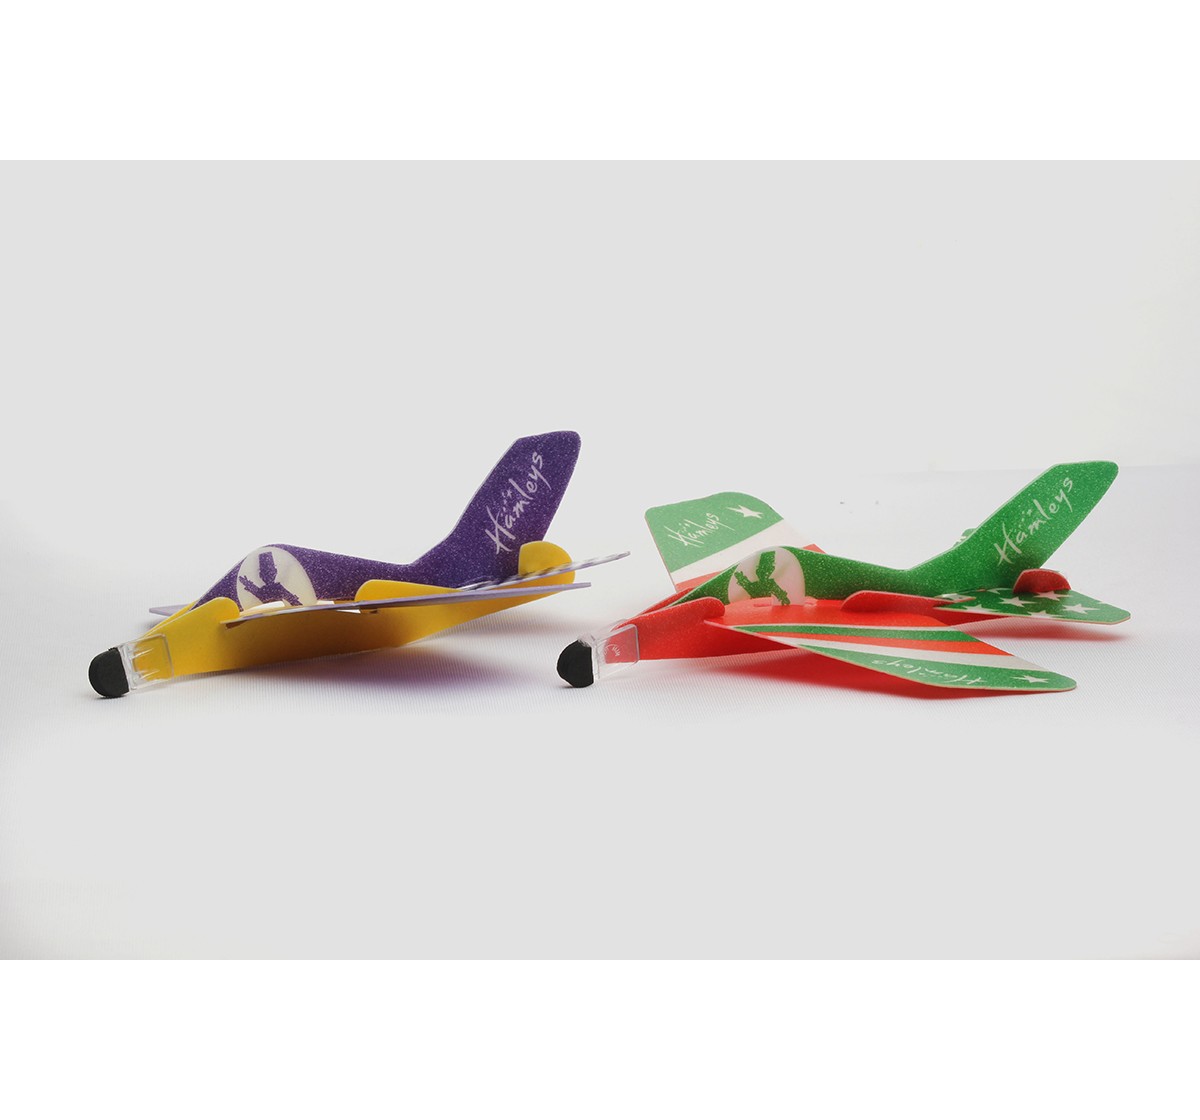  Hamleys Hand Gliders Plane Action Toy Games for Kids age 3Y+ 